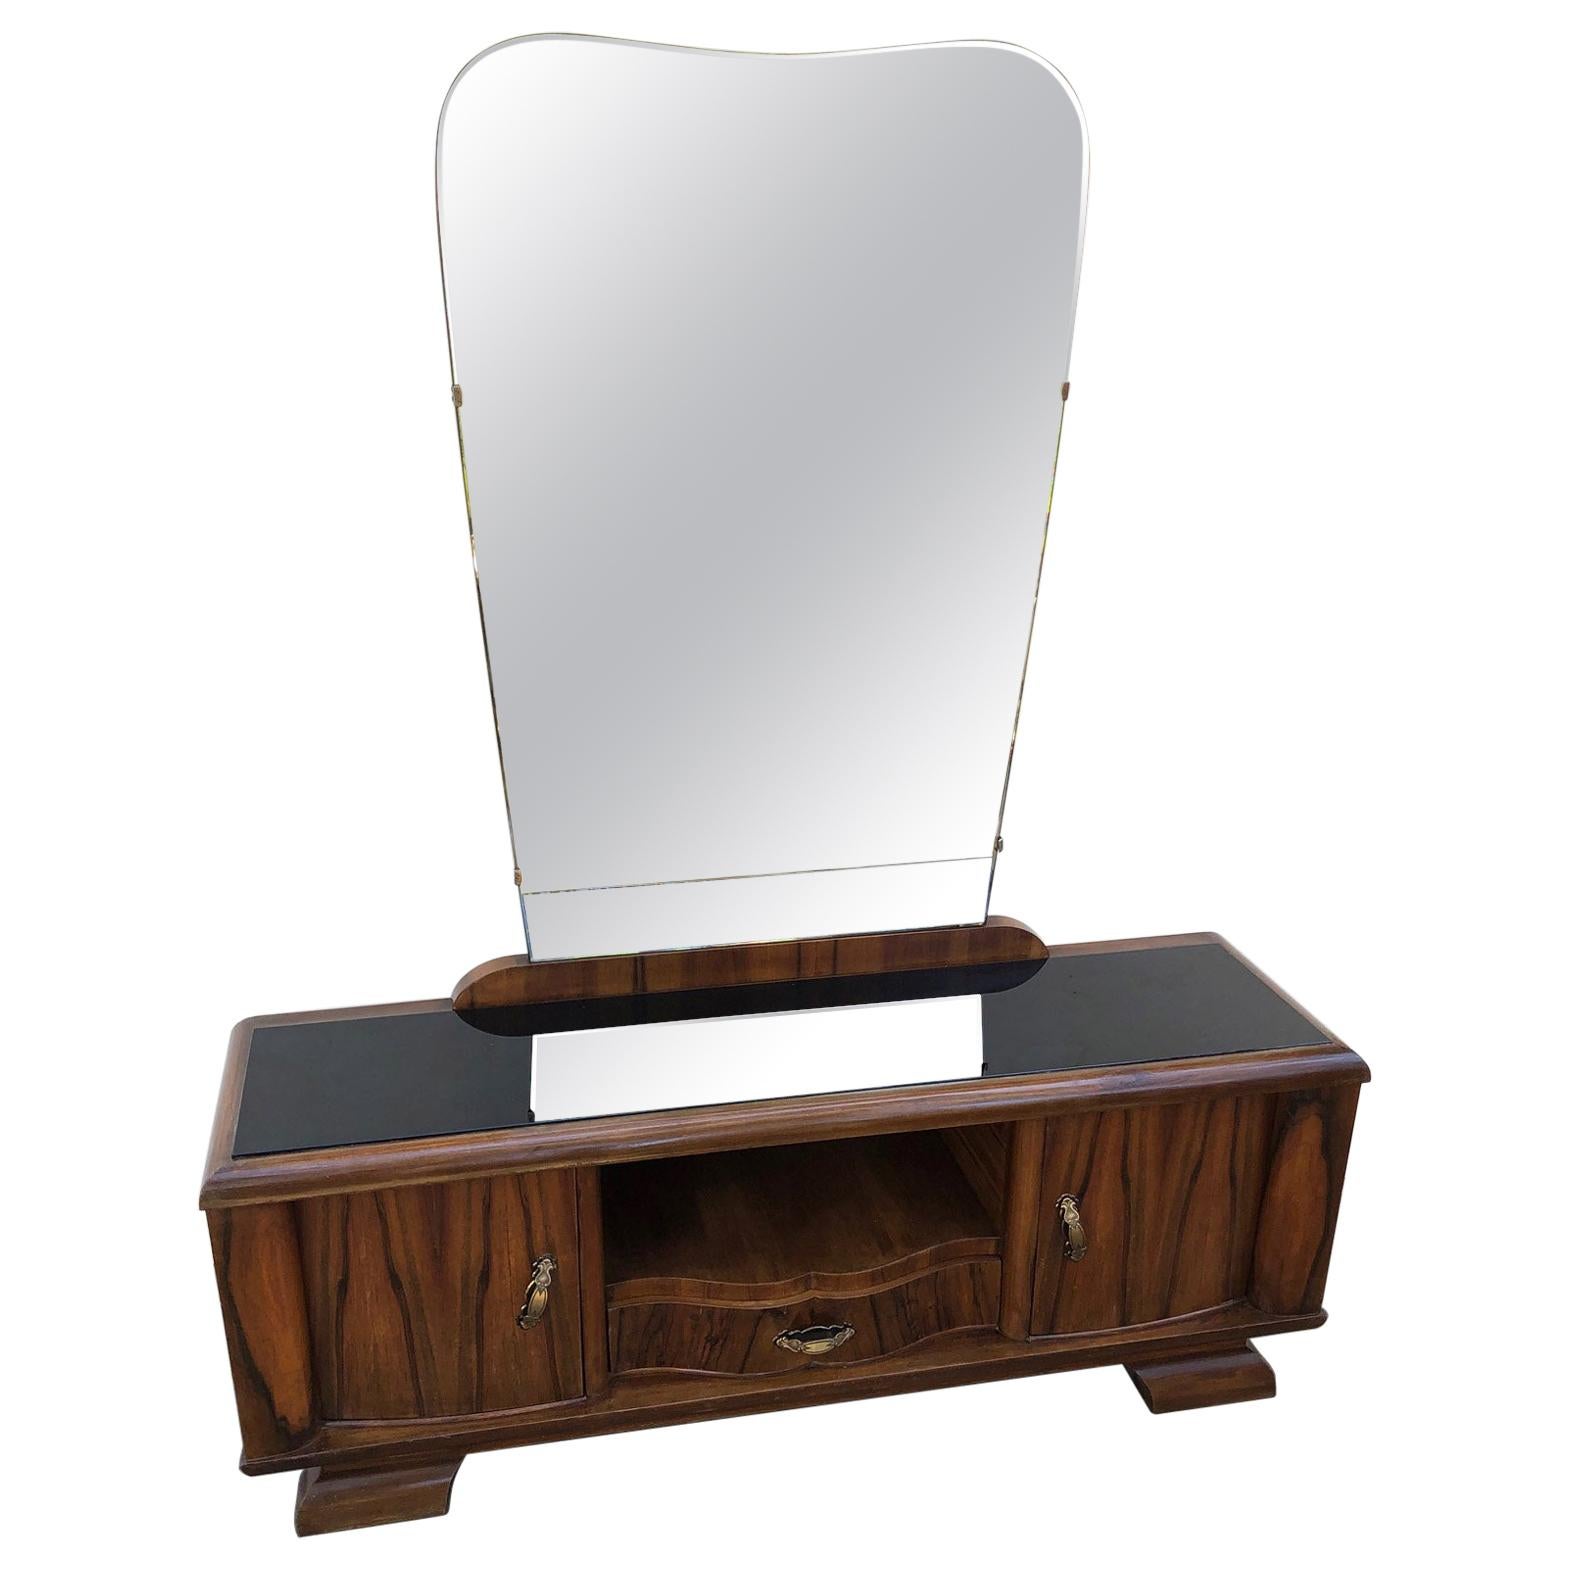 1940s Sideboard Rosewood Walnut Honeycomb Natural Color Italian Design Mirror For Sale